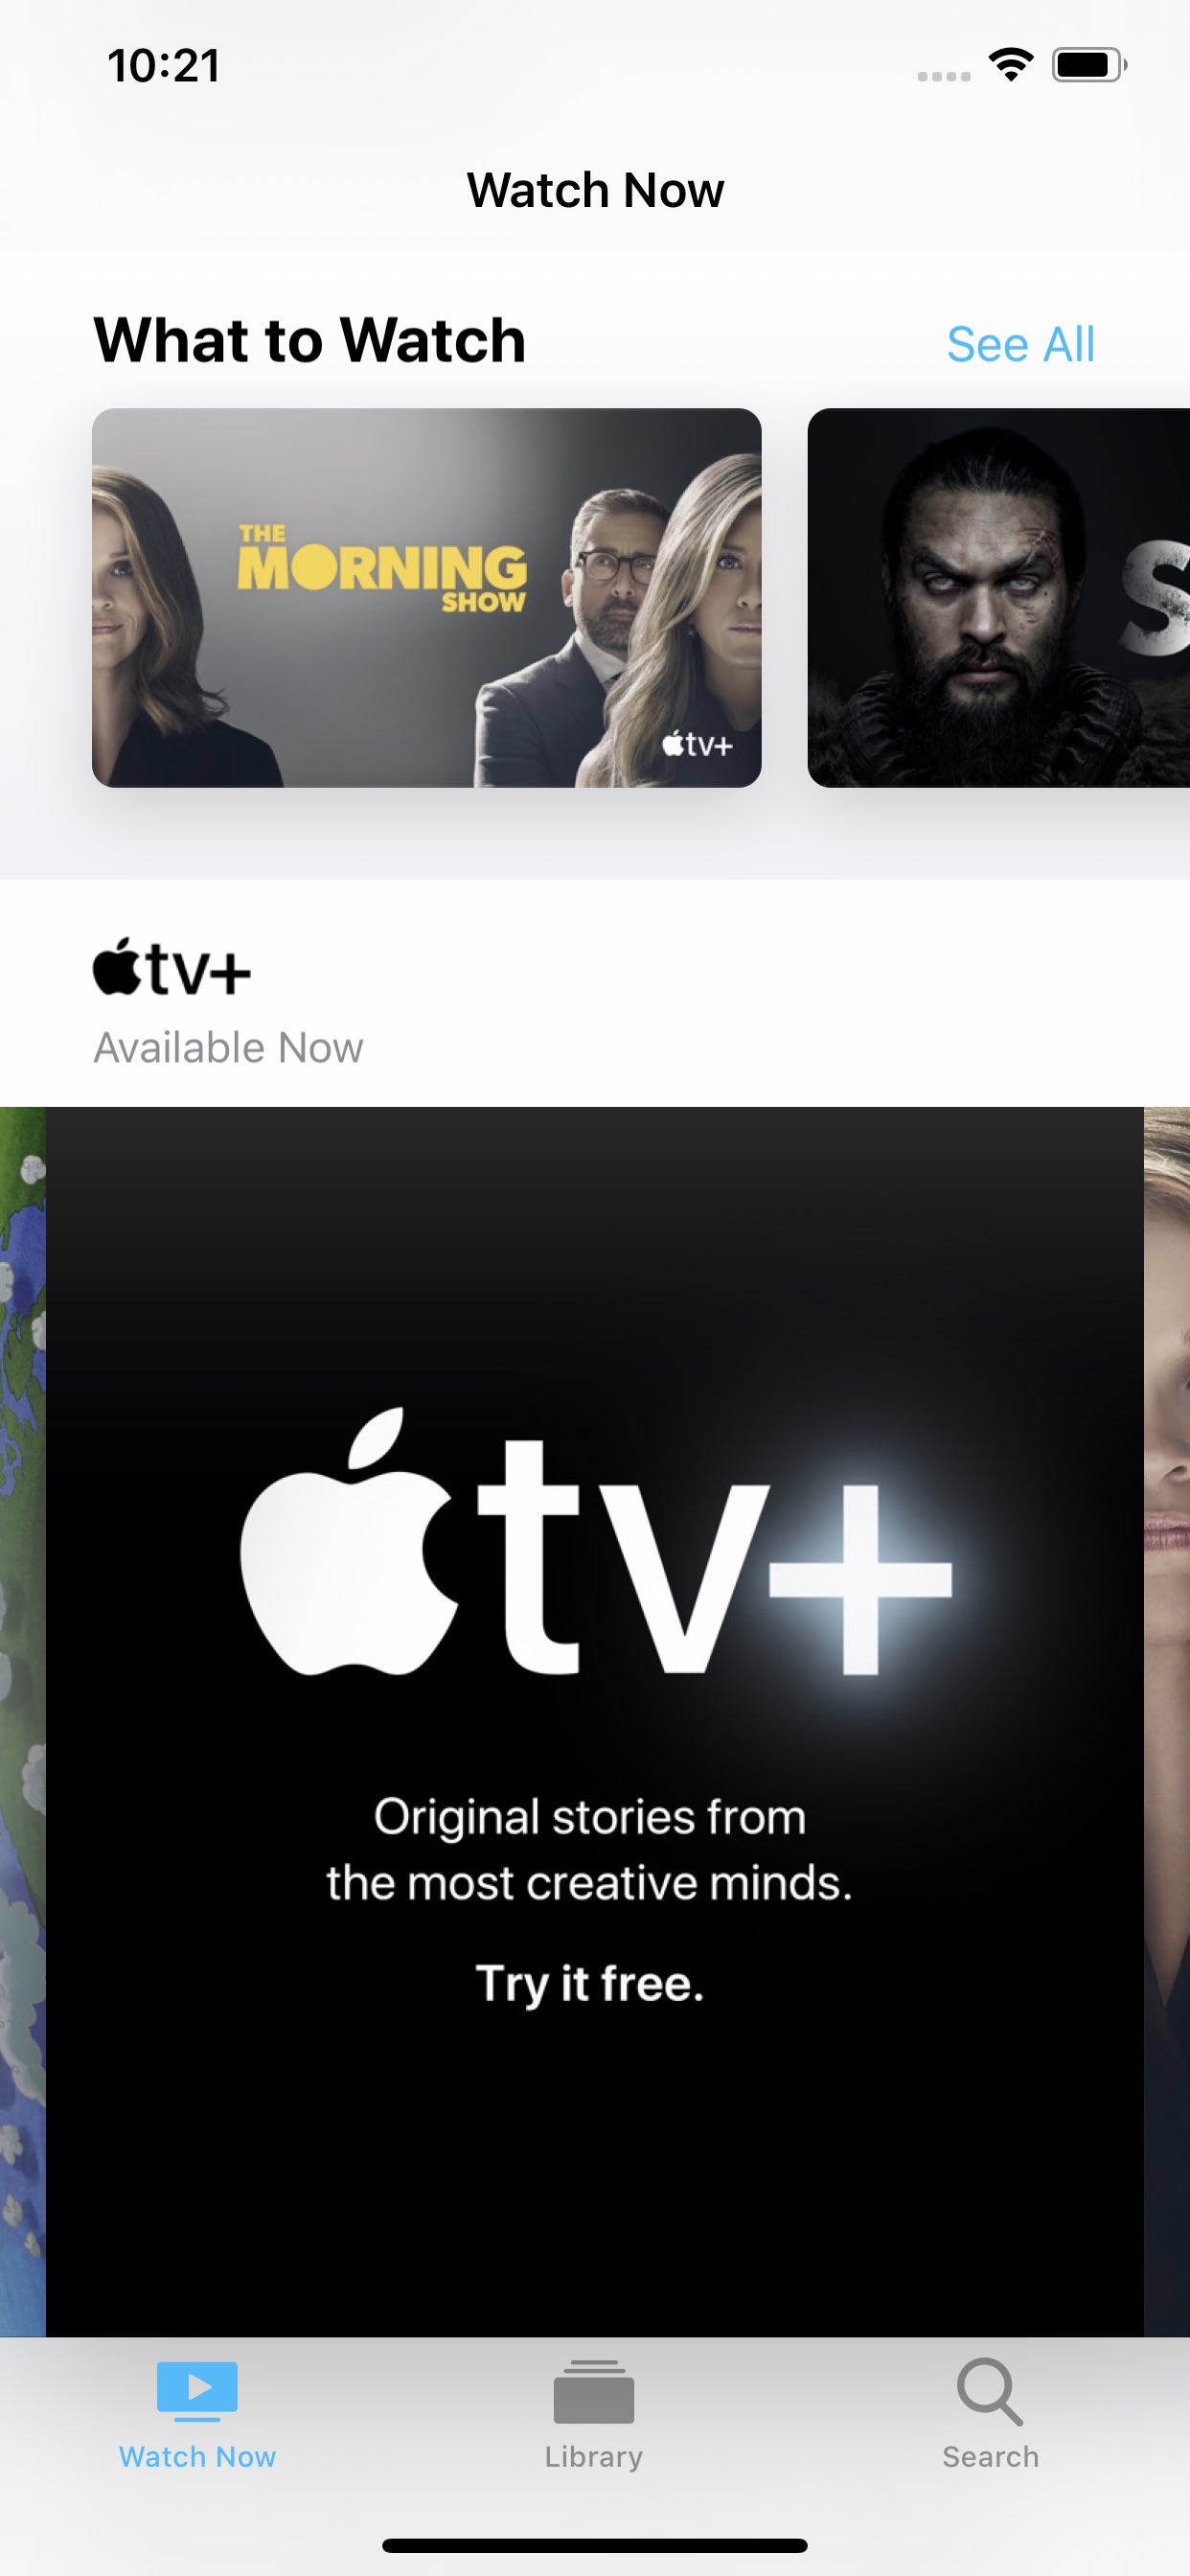 How to Activate Your Free One Year Subscription to Apple TV+